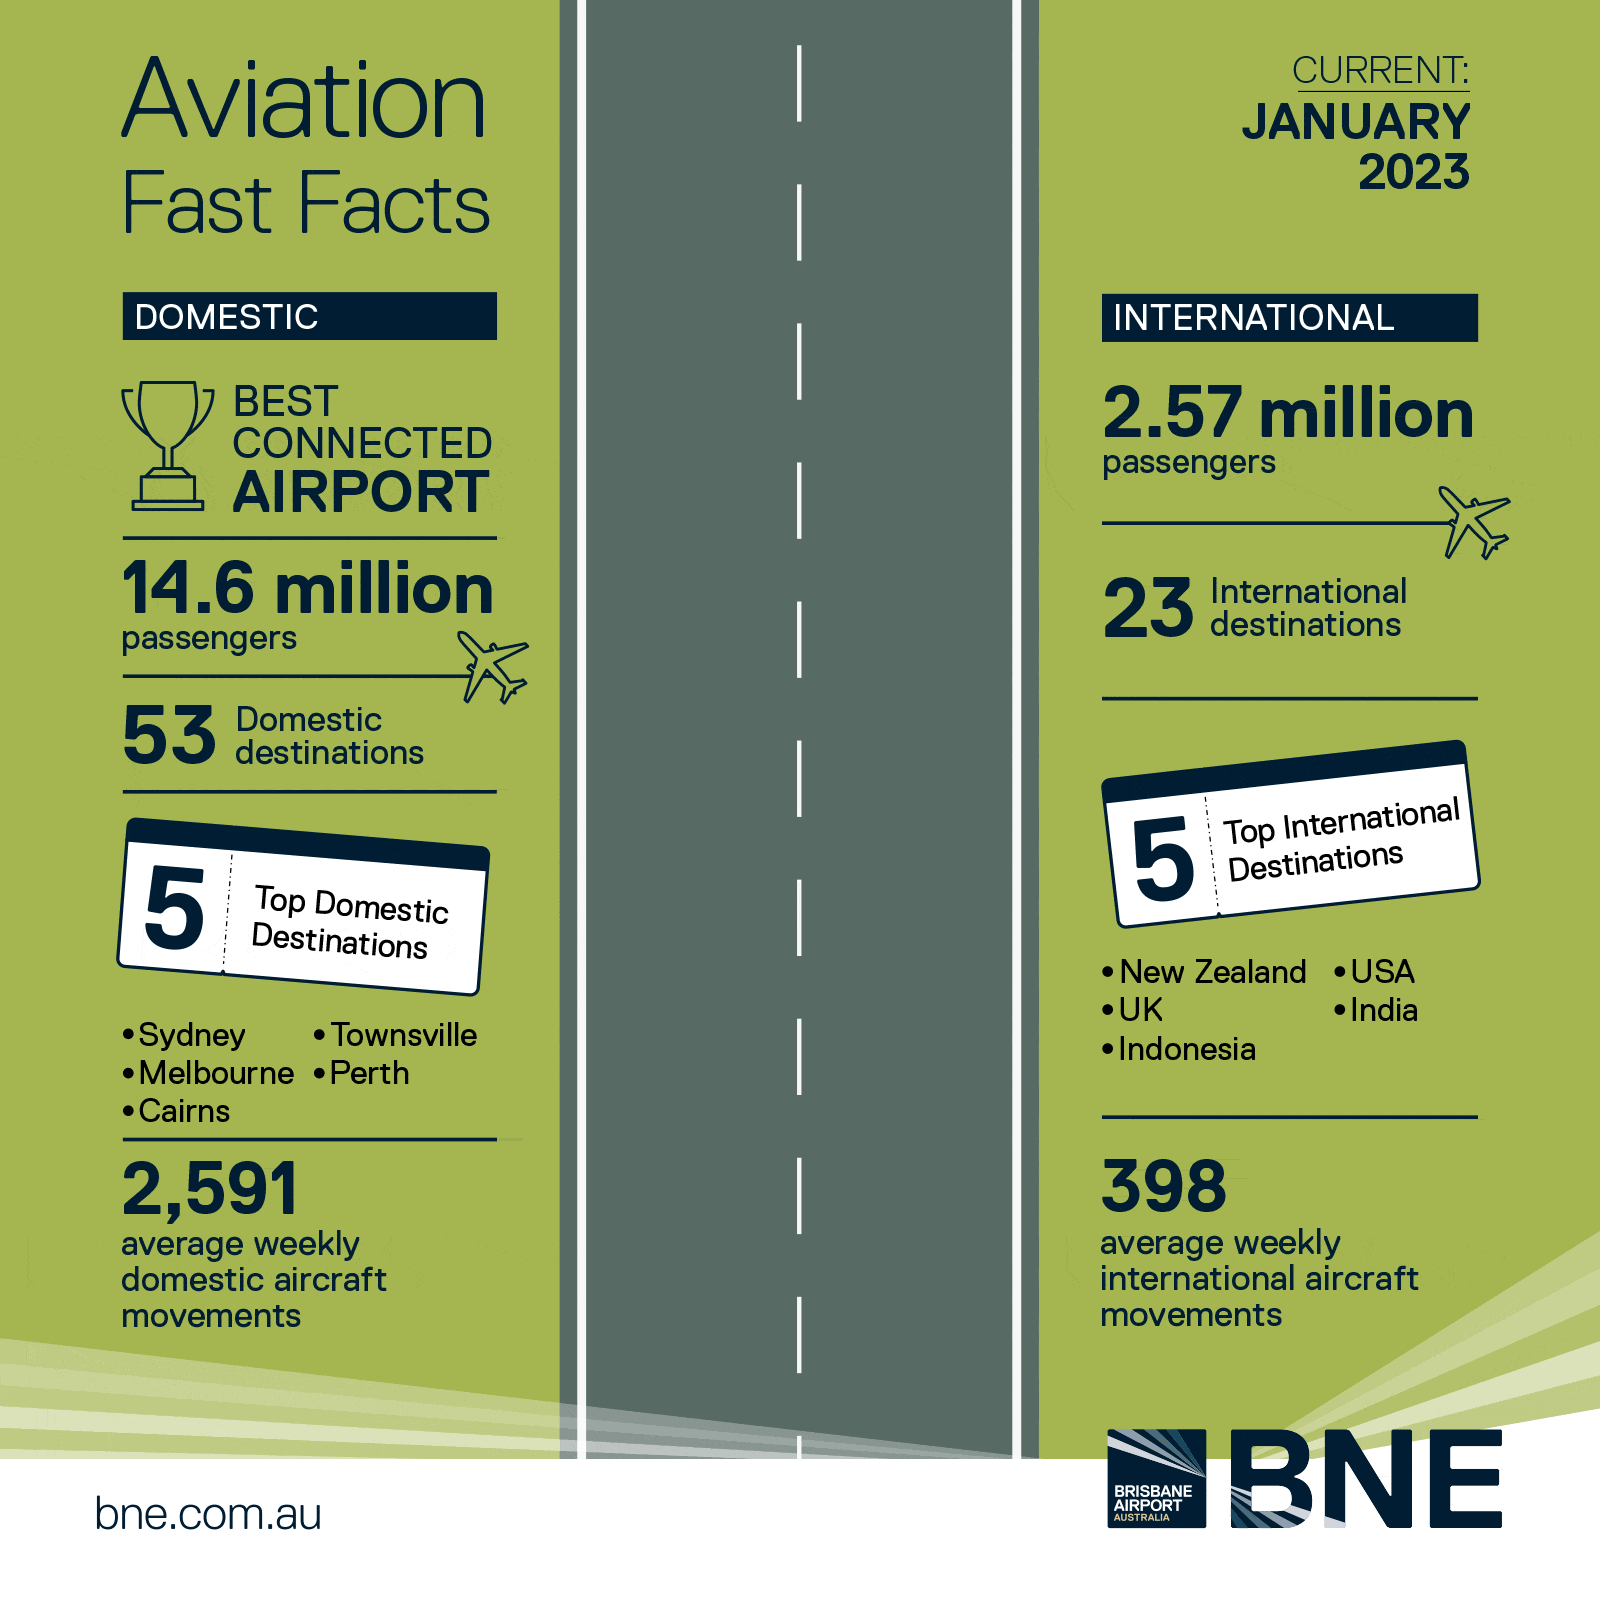 Infographic displaying key aviation facts